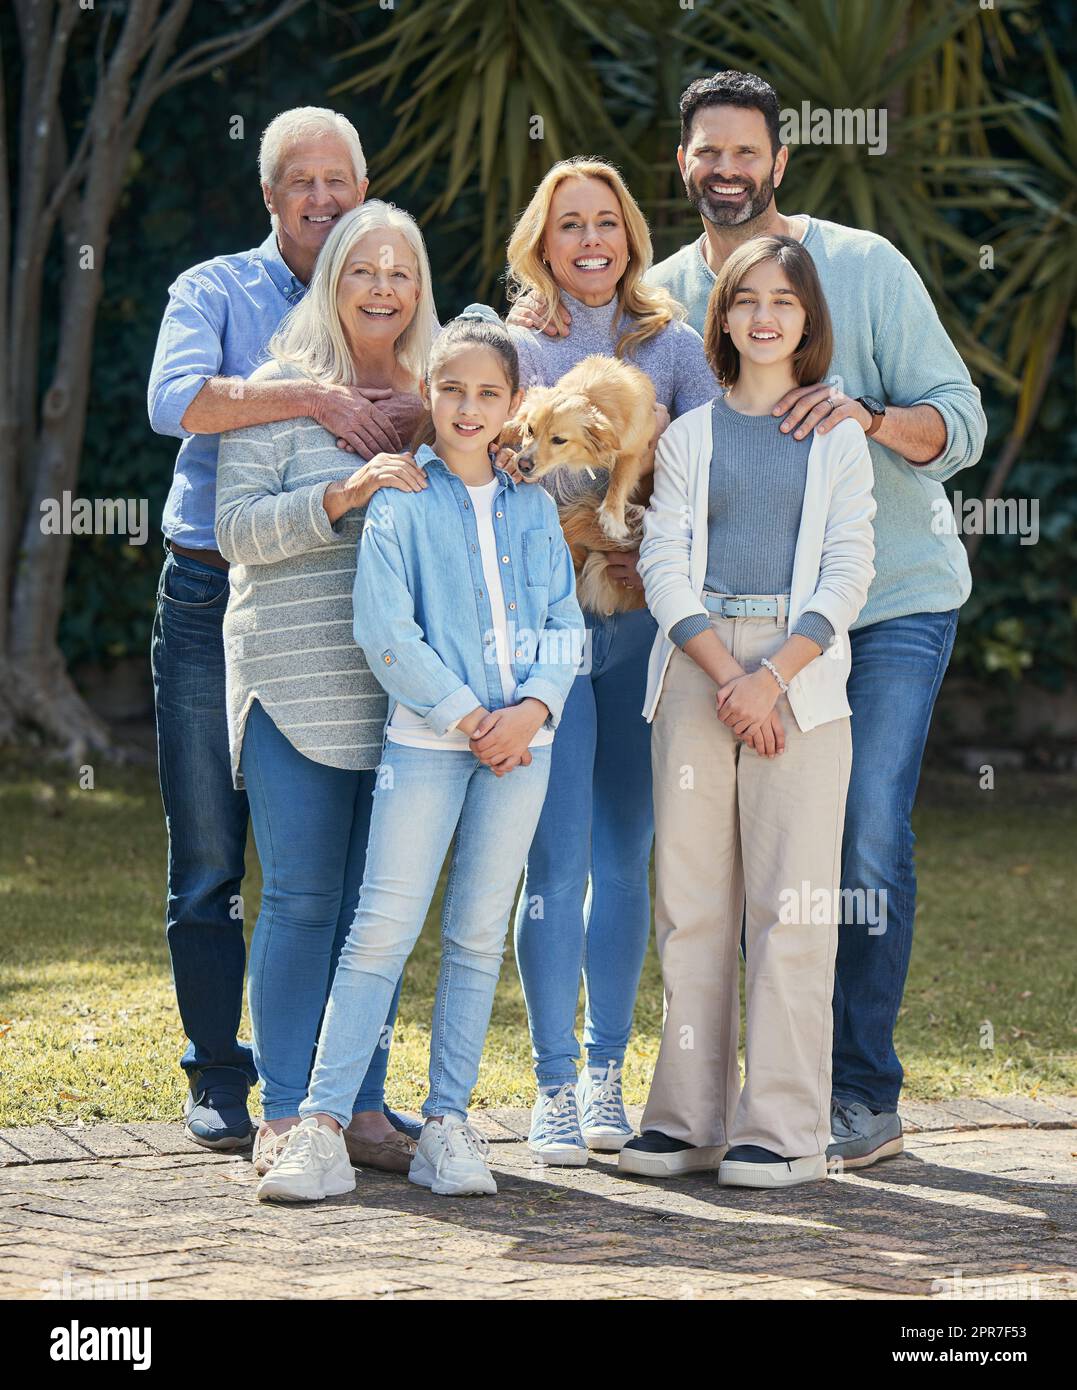 Family brings hardship. But it also brings much joy. Shot of a multi-generational family standing together outside. Stock Photo